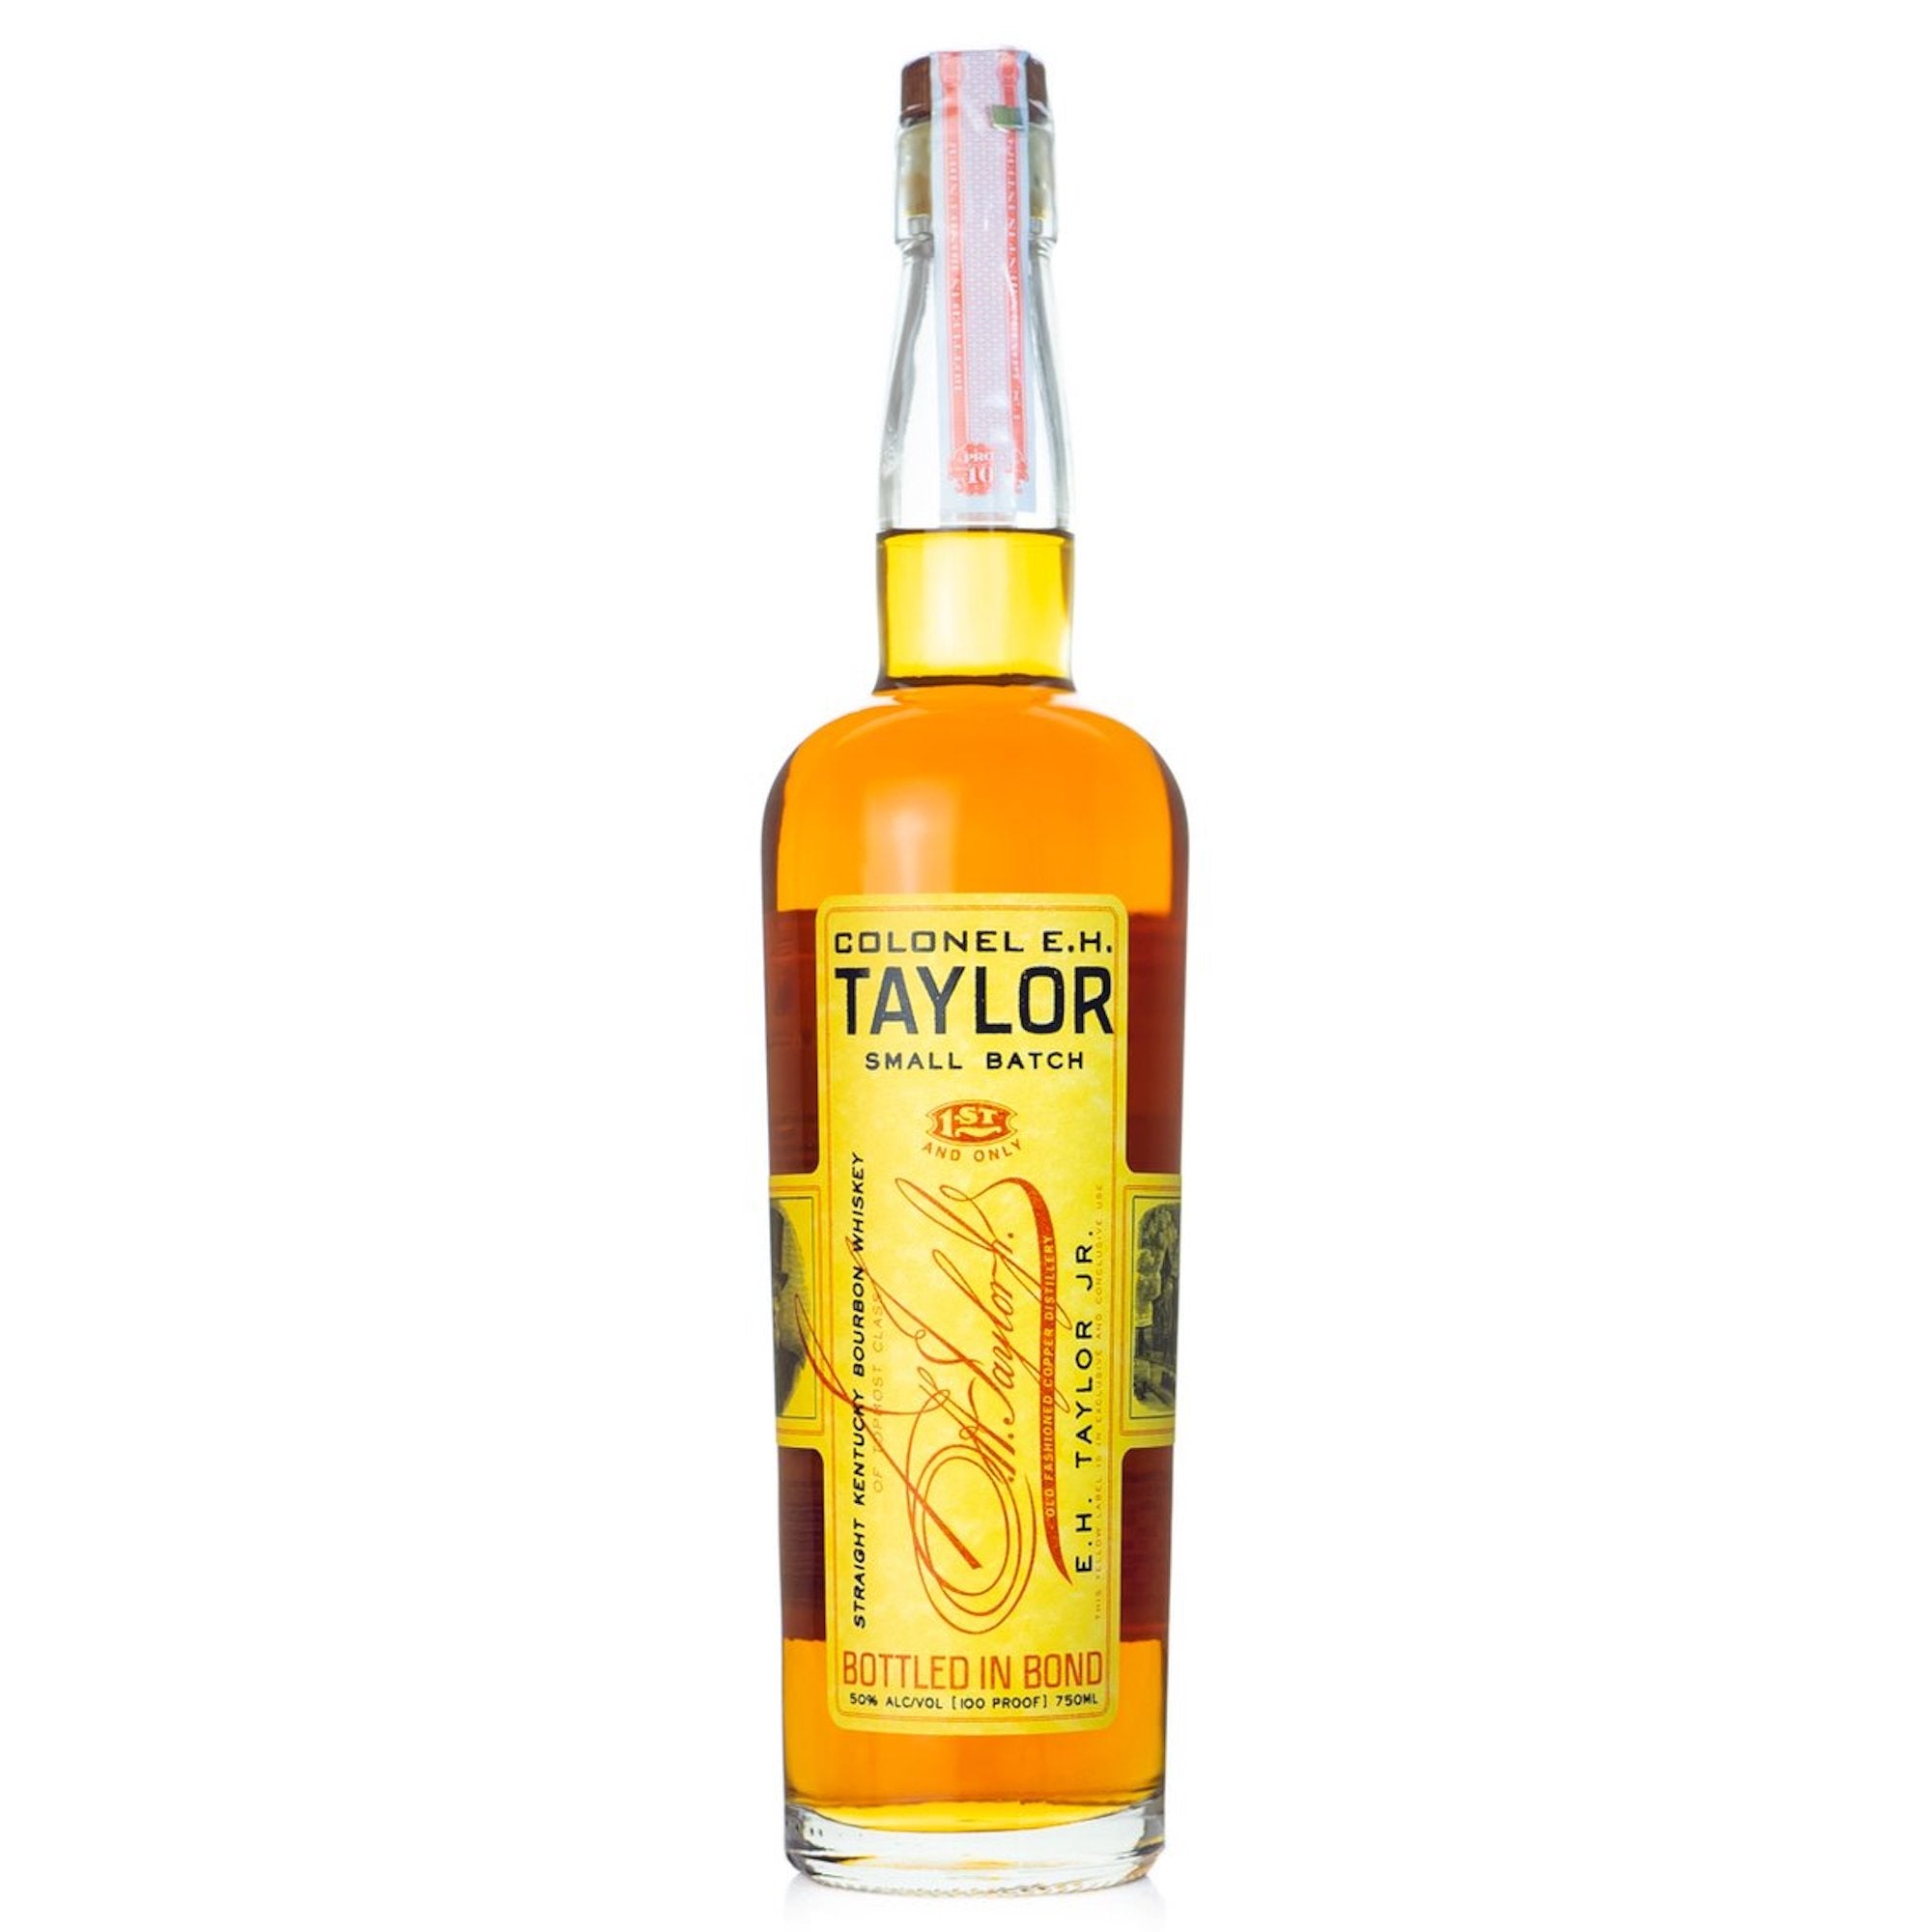 Colonel E.H. Taylor Small Batch Bottle In Bond Bourbon Whiskey